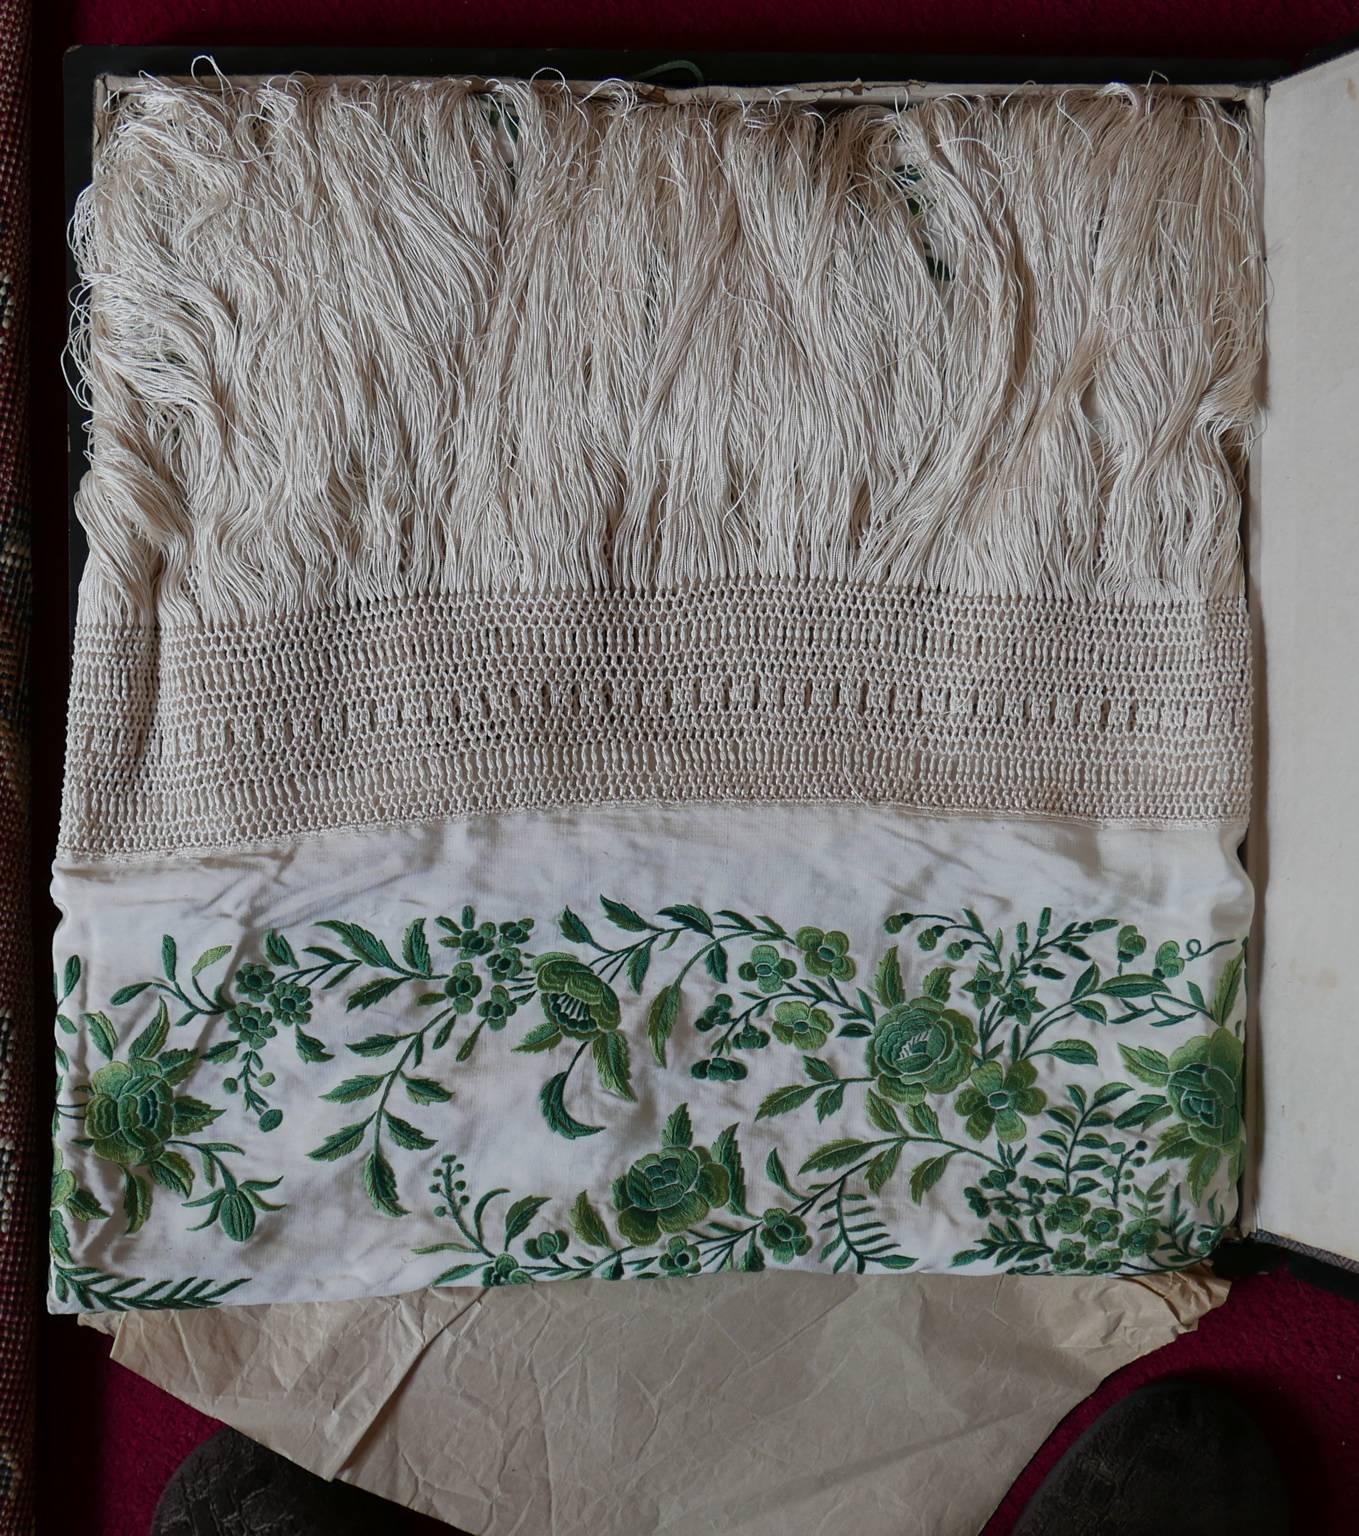 Chinese Export 19th Century Canton Boxed Set of Silk Piano Cover or Drape with Watercolor